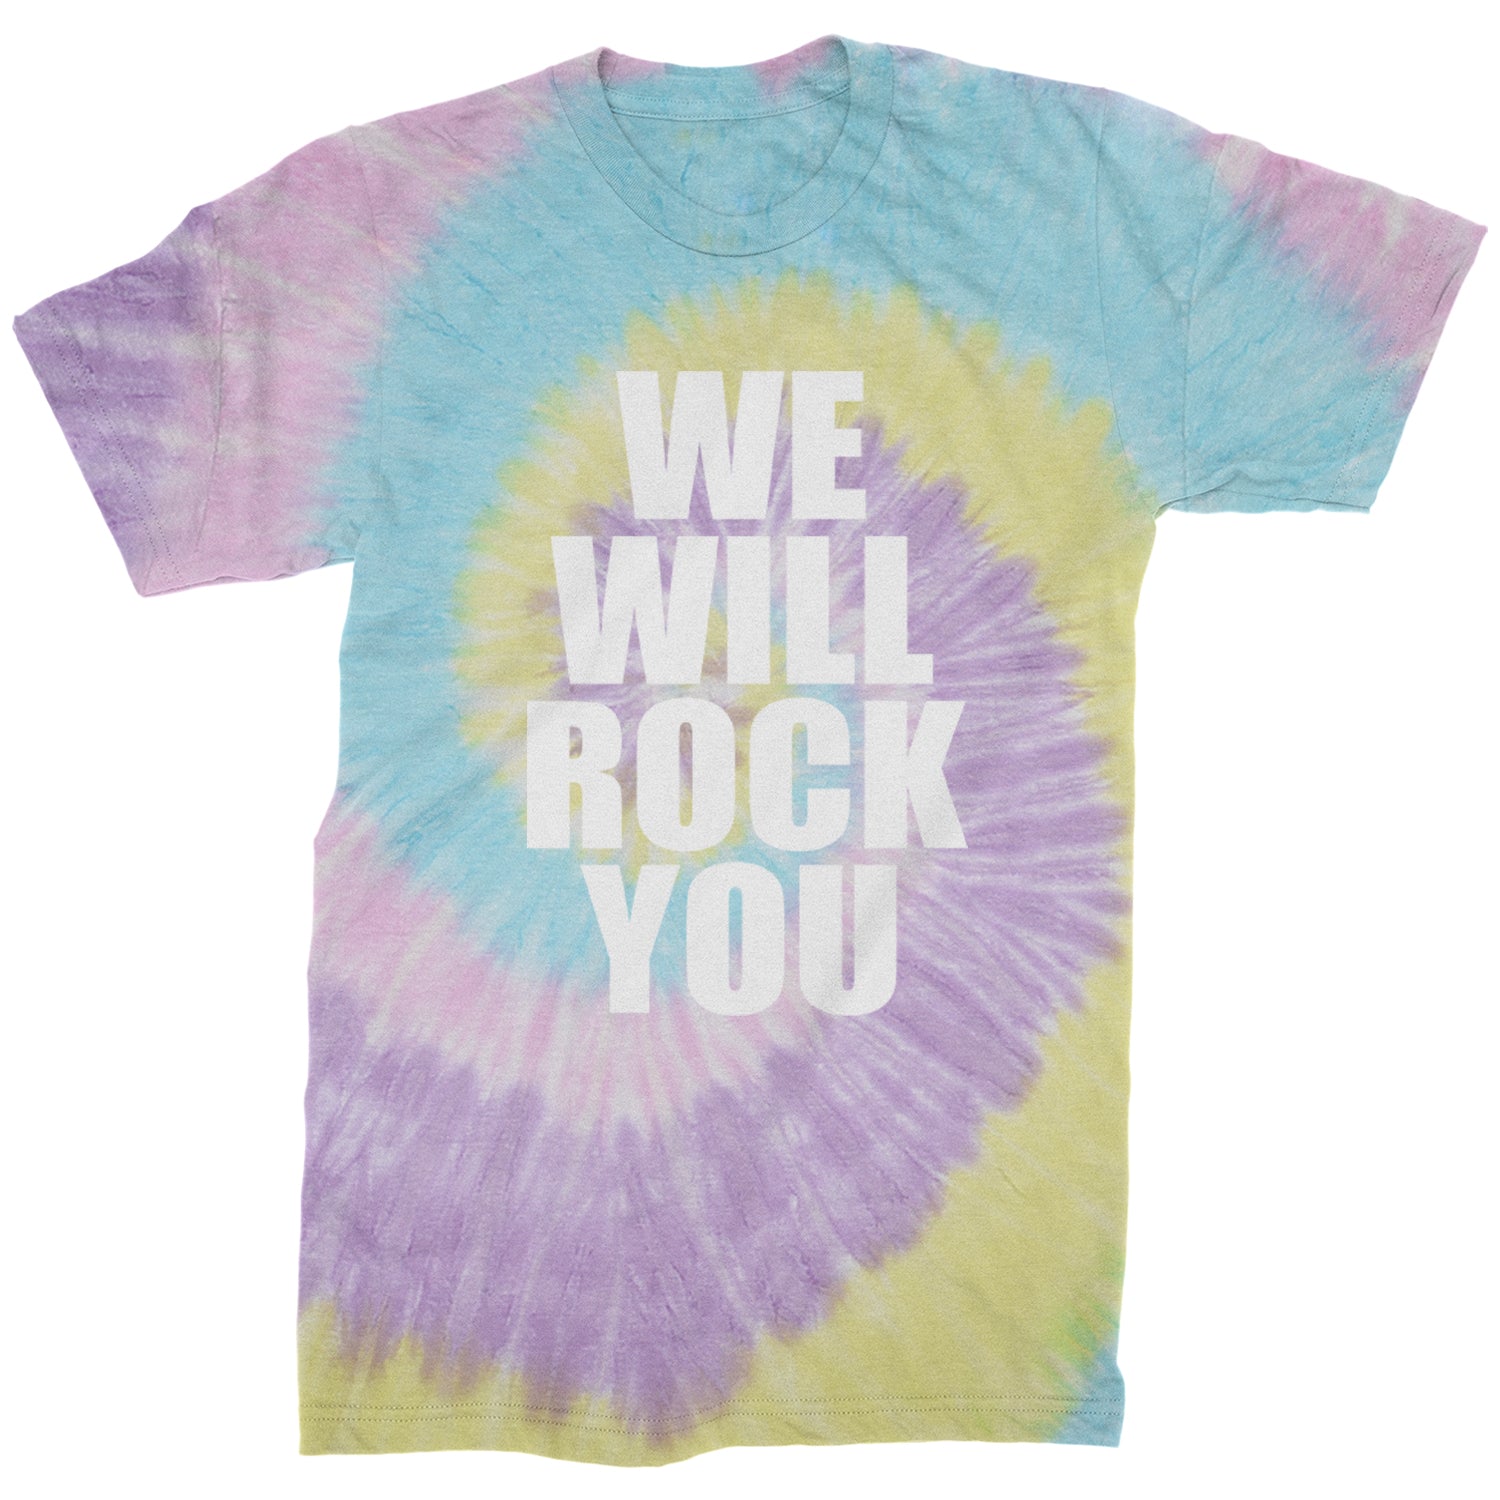 We Will Rock You Mens T-shirt #expressiontees by Expression Tees